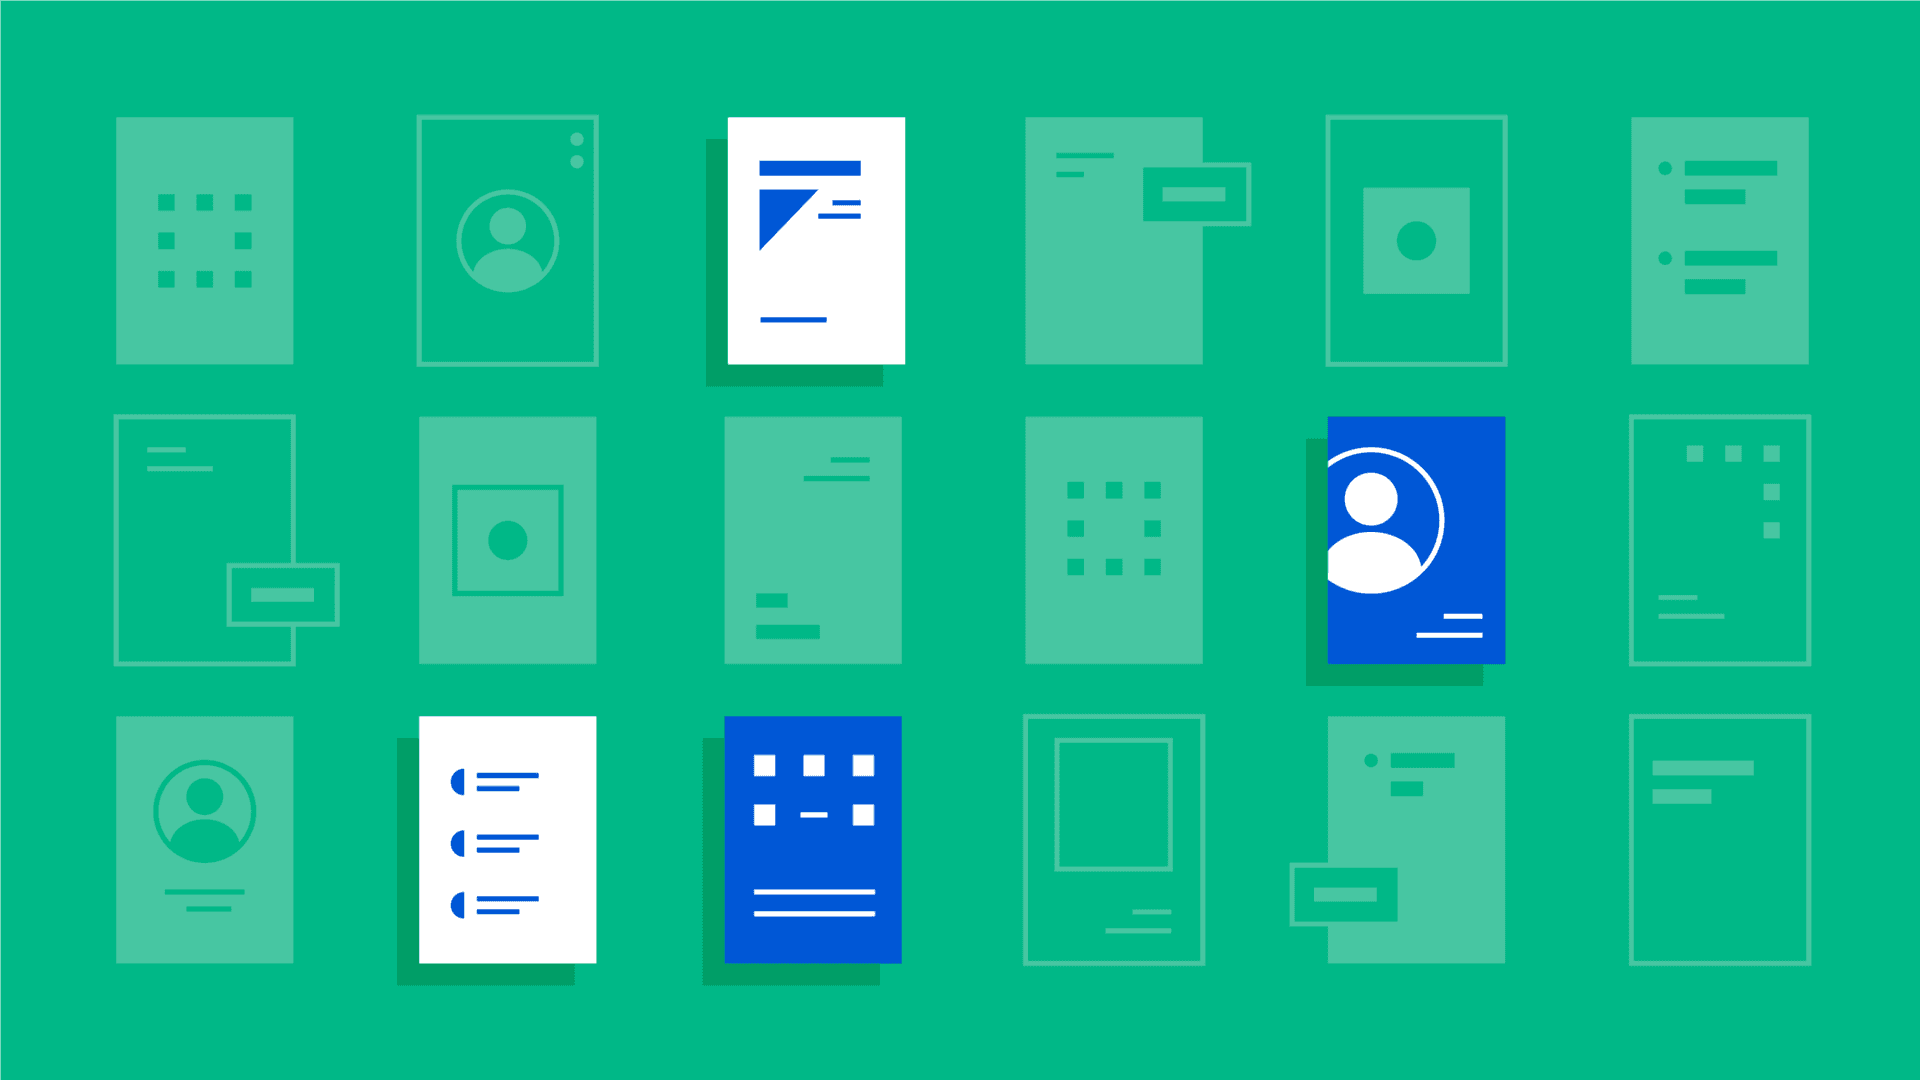 Bold white and blue resumes stand out amongst a grid of light-green documents.